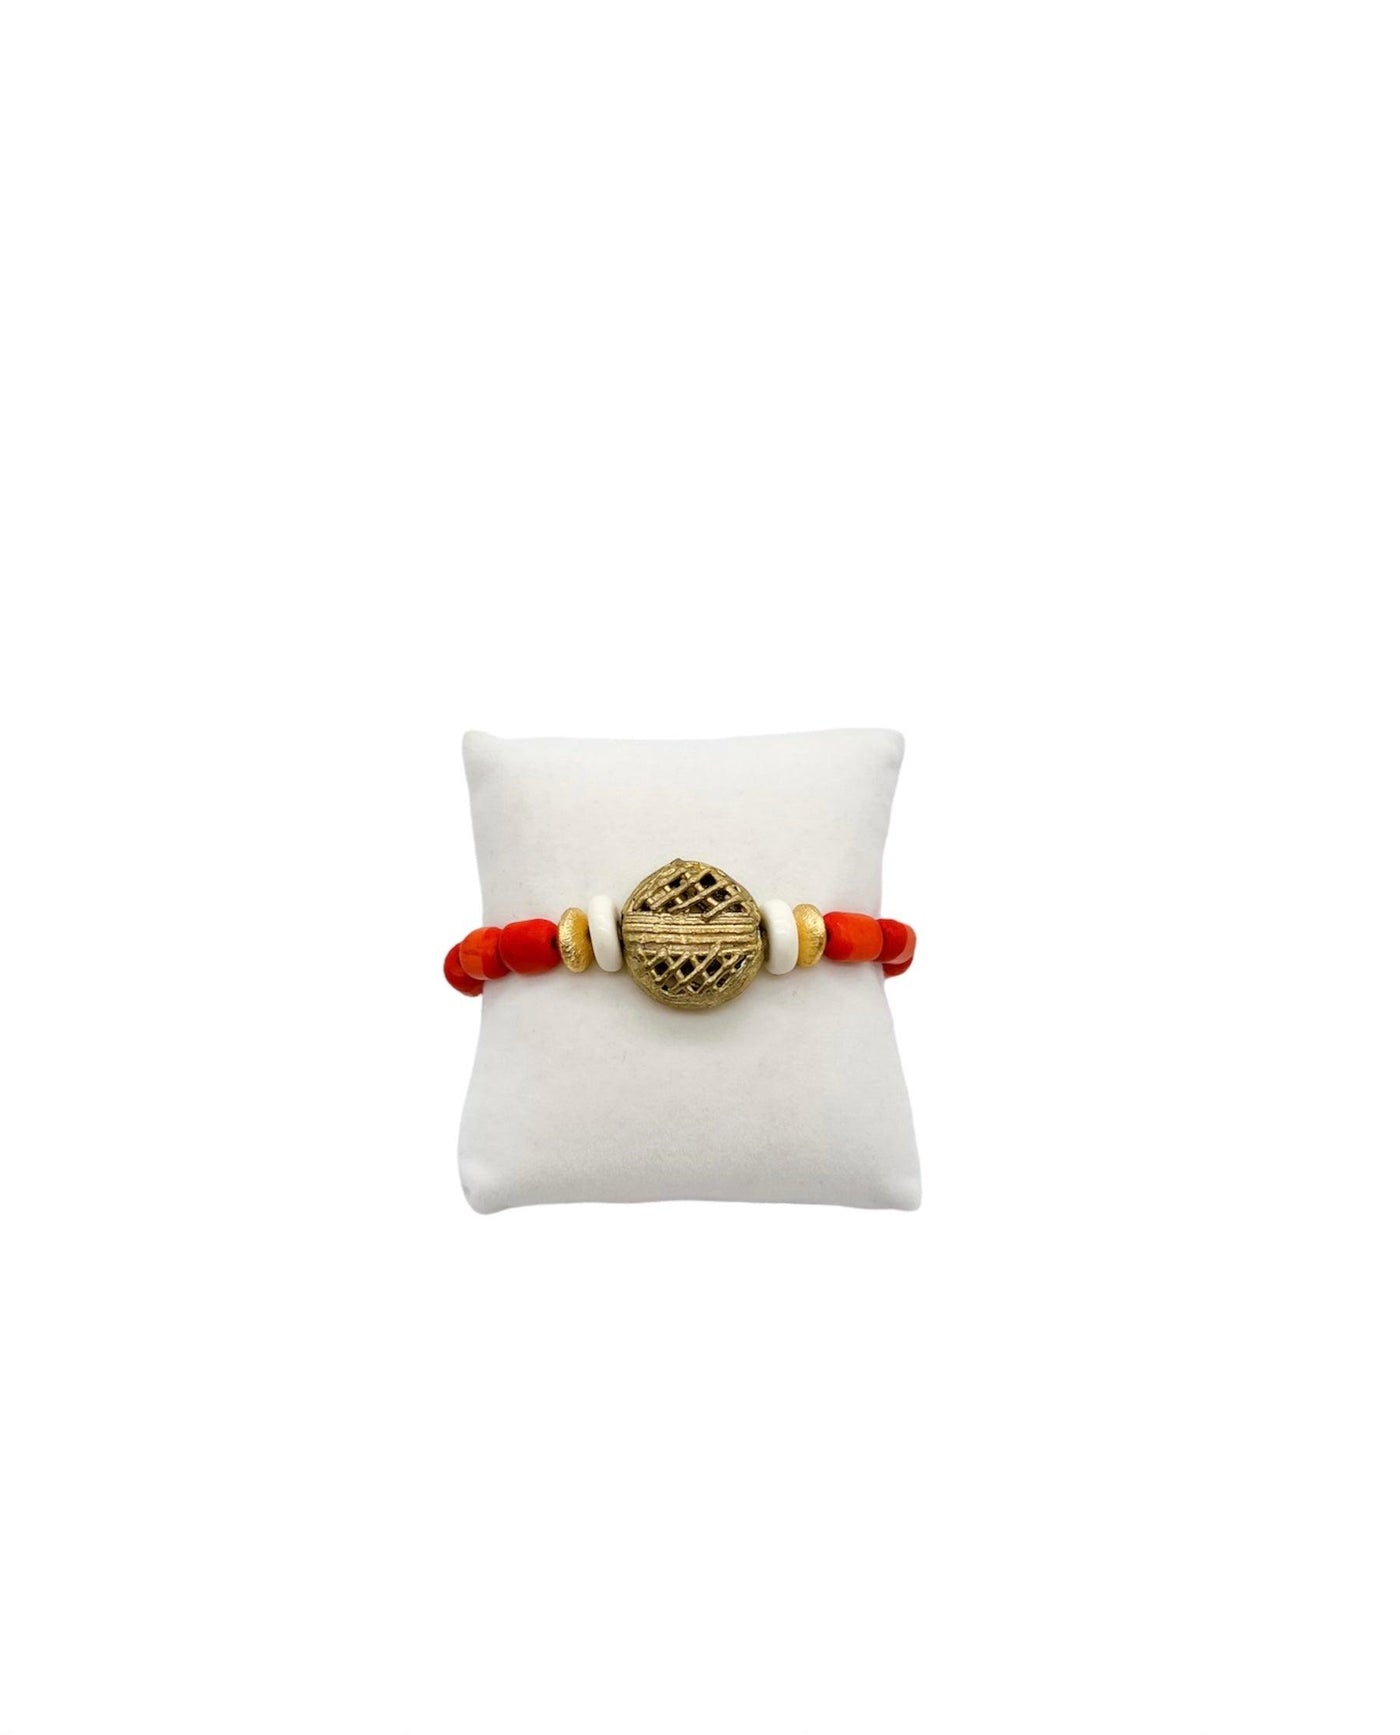 Stretch bracelet with orange short tube beads, flat gold beads, flat white beads and a large textured gold beads on a white display pillow